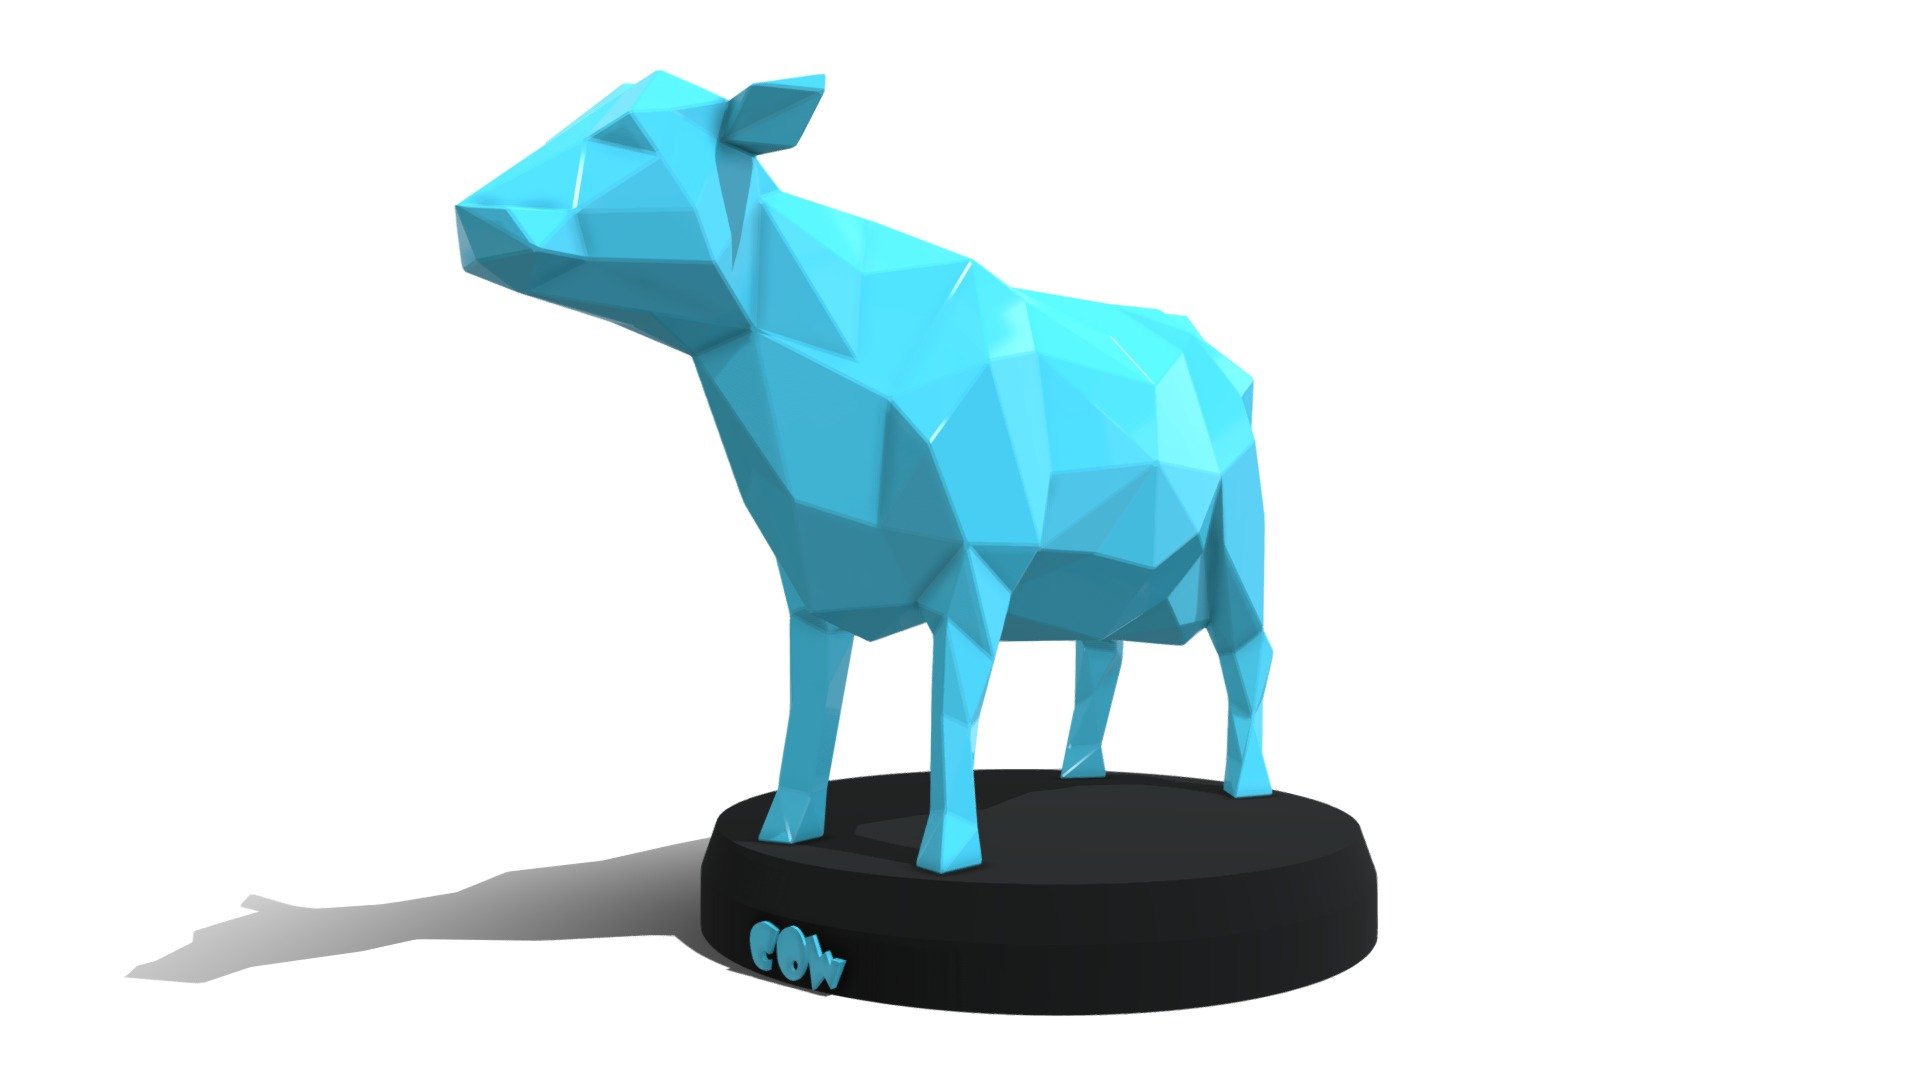 Polygonal 3D Model with Parametric modeling with gold material, make it recommend for :




Basic modeling 

Rigging 

sculpting 

Become Statue

Decorate

3D Print File

Toy

Have fun  :) - Poly Cow - Buy Royalty Free 3D model by Puppy3D 3d model